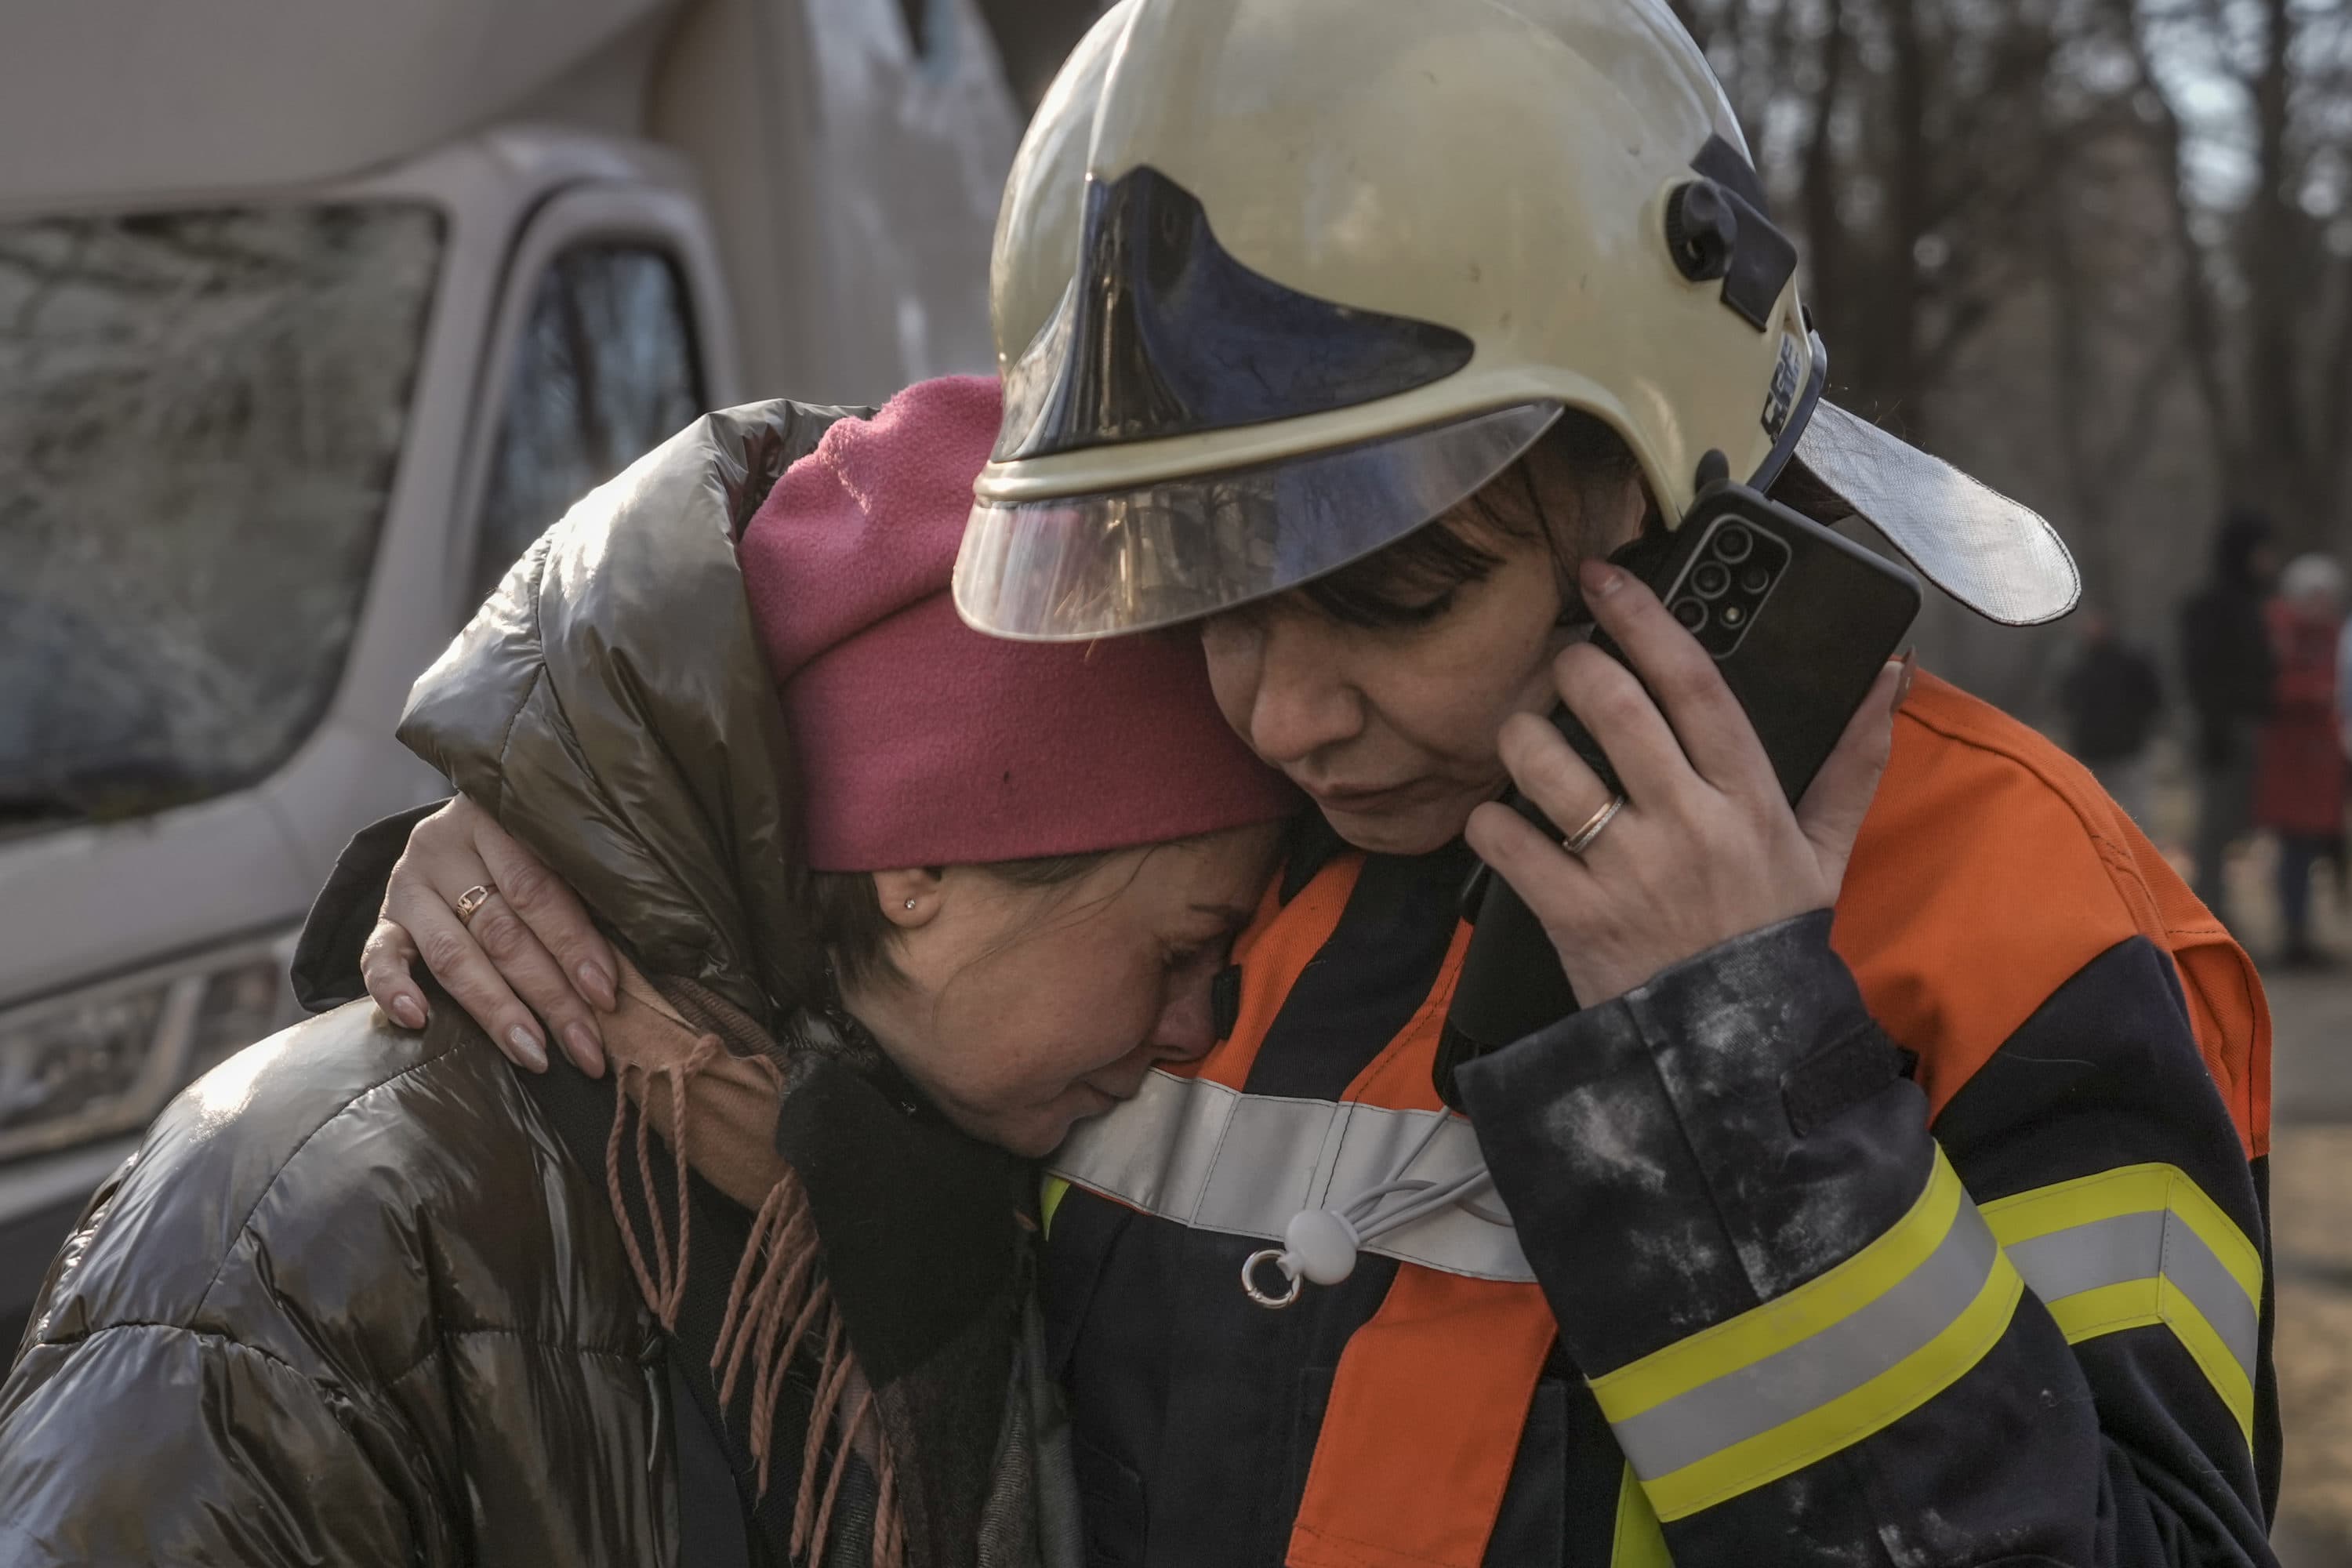 A firefighter comforts a woman outside a destroyed apartment building after a bombing in a residential area in Kyiv, Ukraine, Tuesday, March 15, 2022. (Vadim Ghirda/AP)